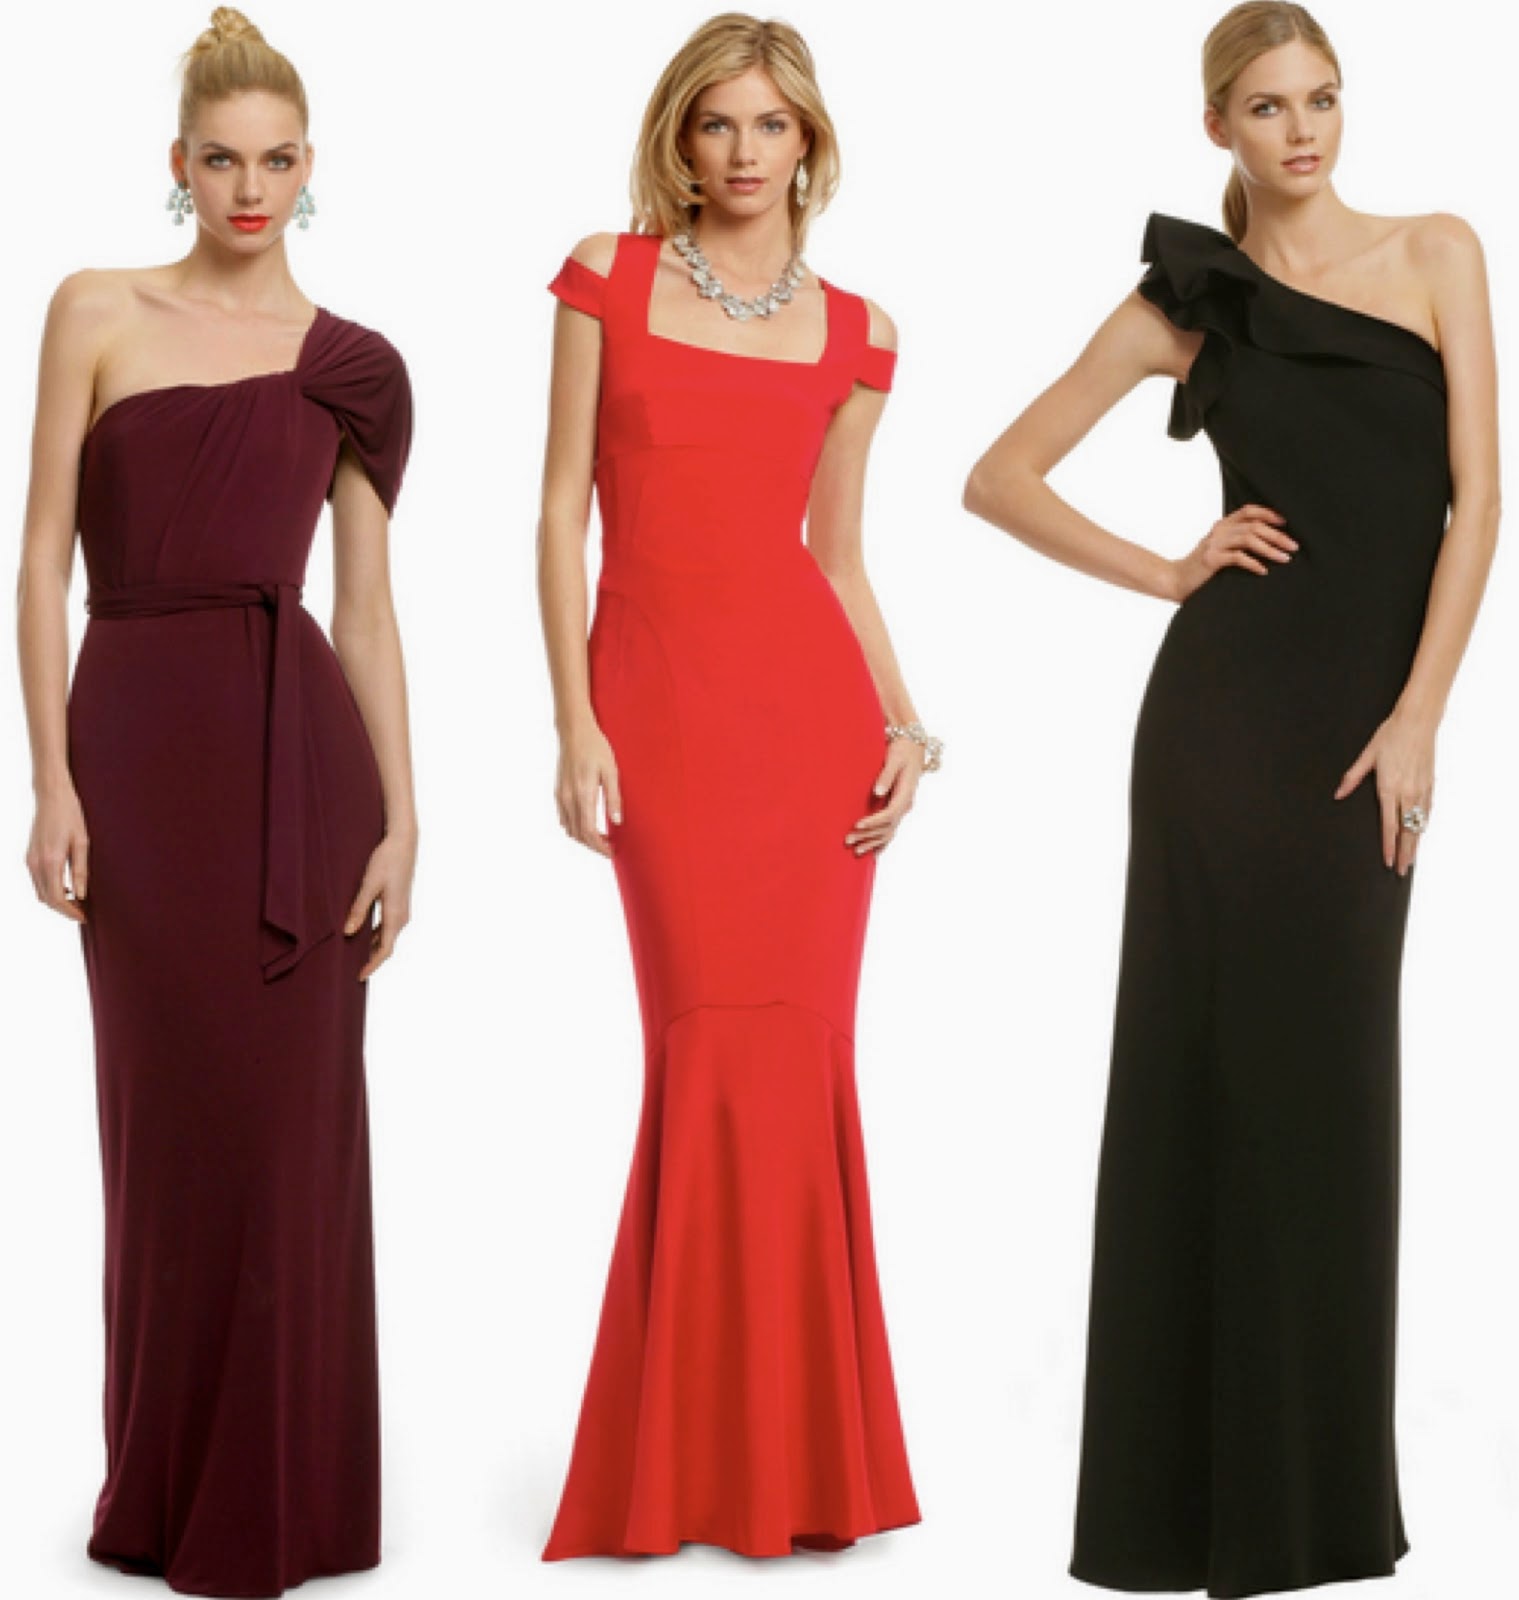 women's clothing for black tie event